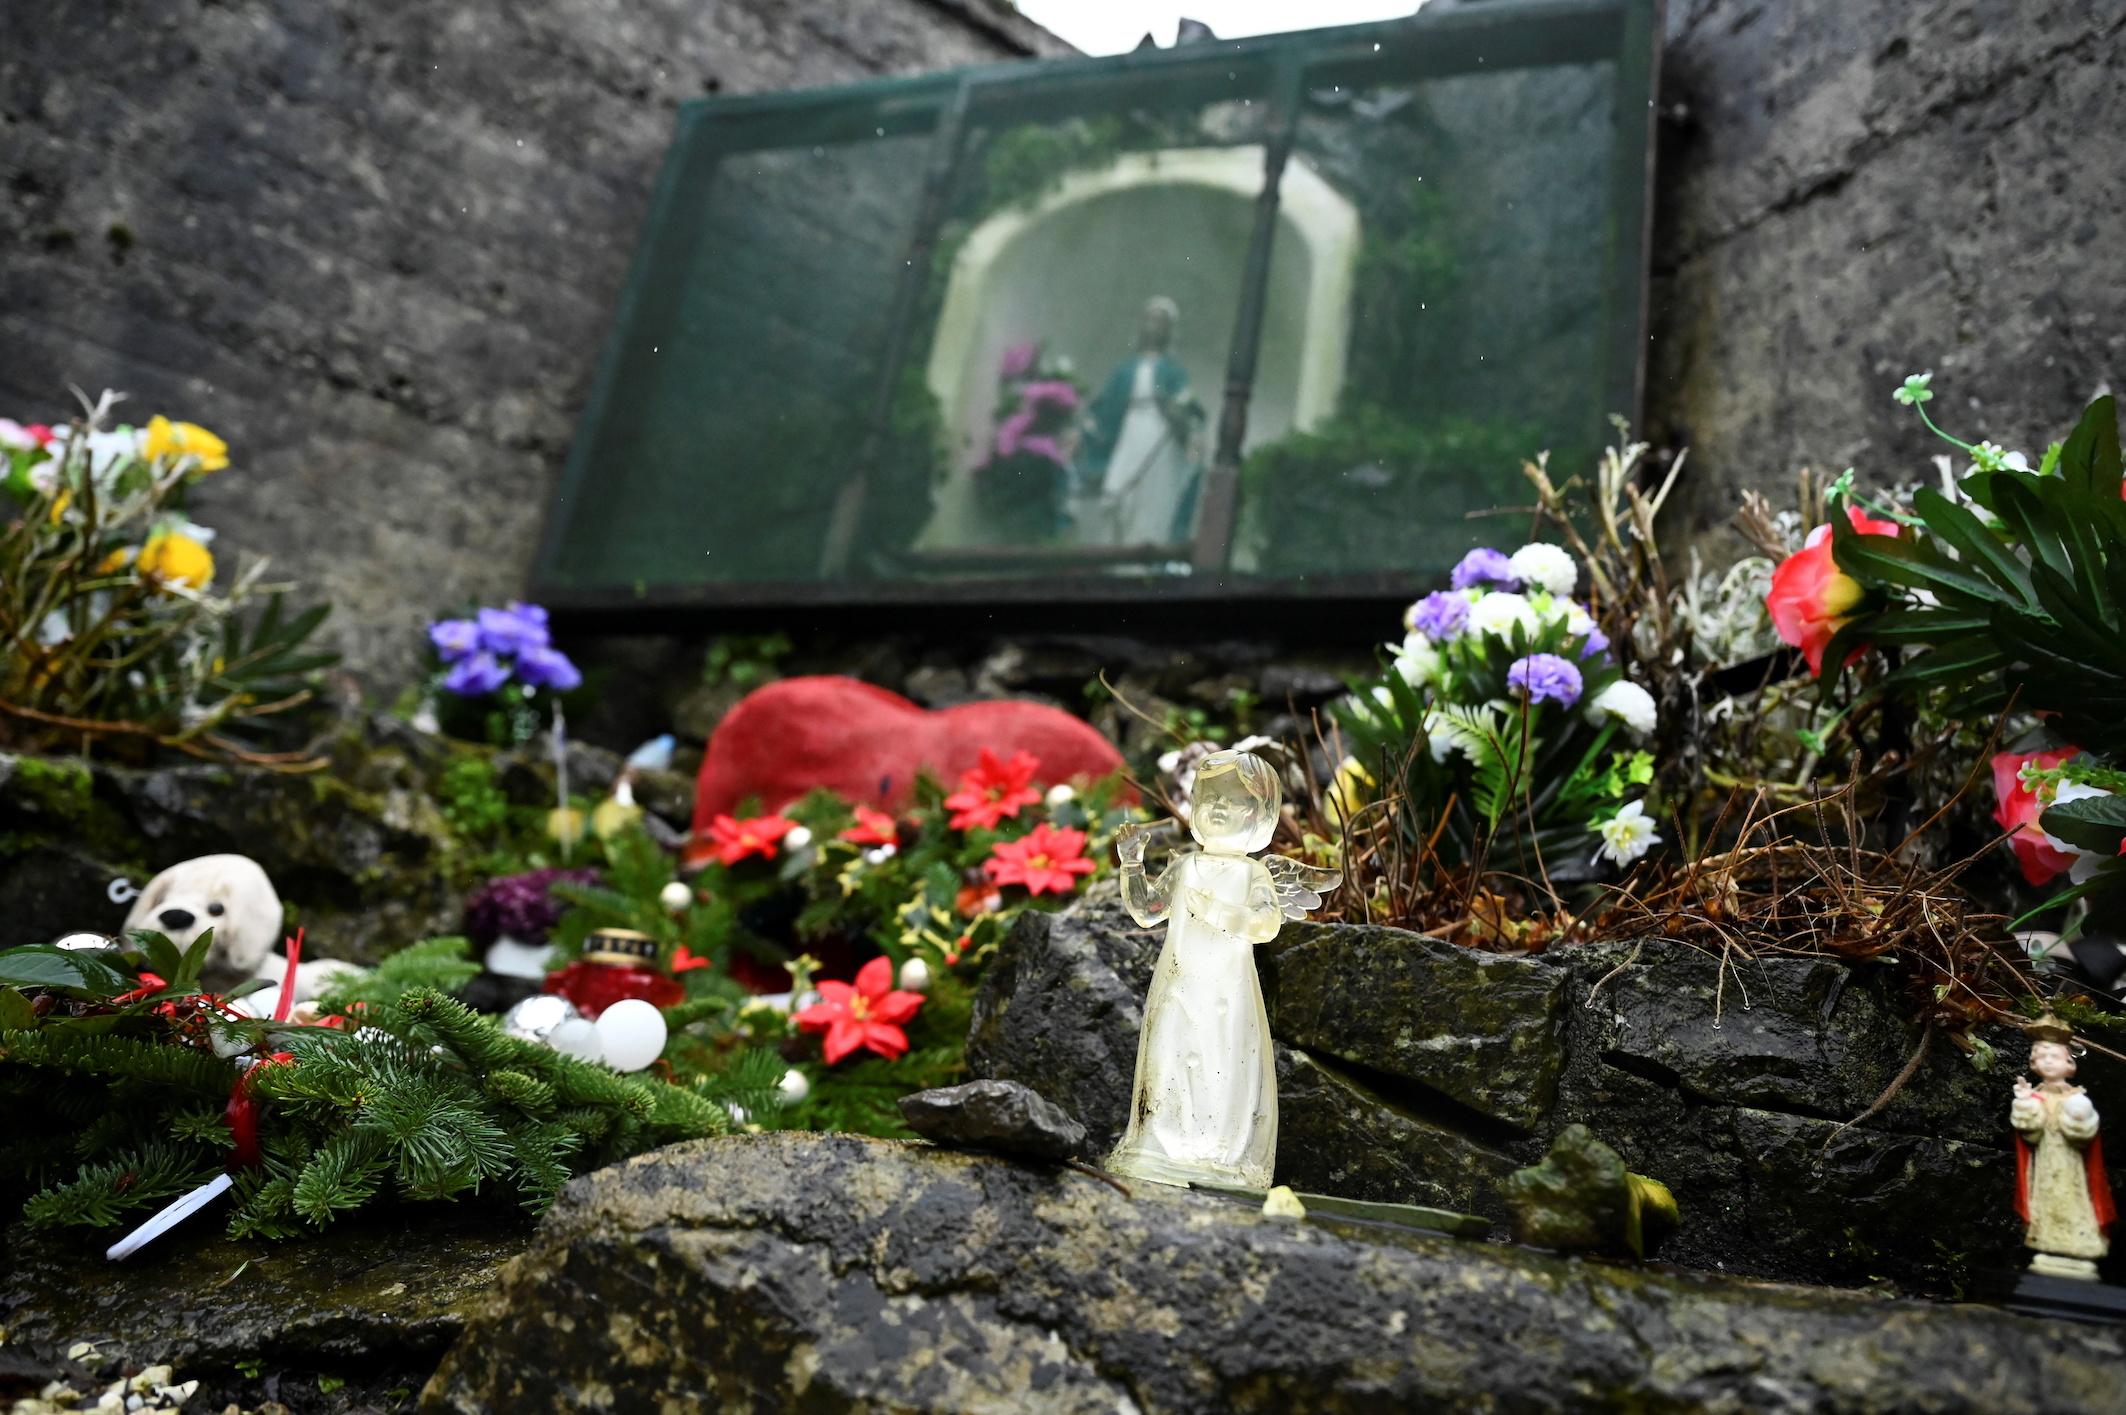 Religious order apologizes for mass grave at Irish Mother and Baby home | GMA News Online